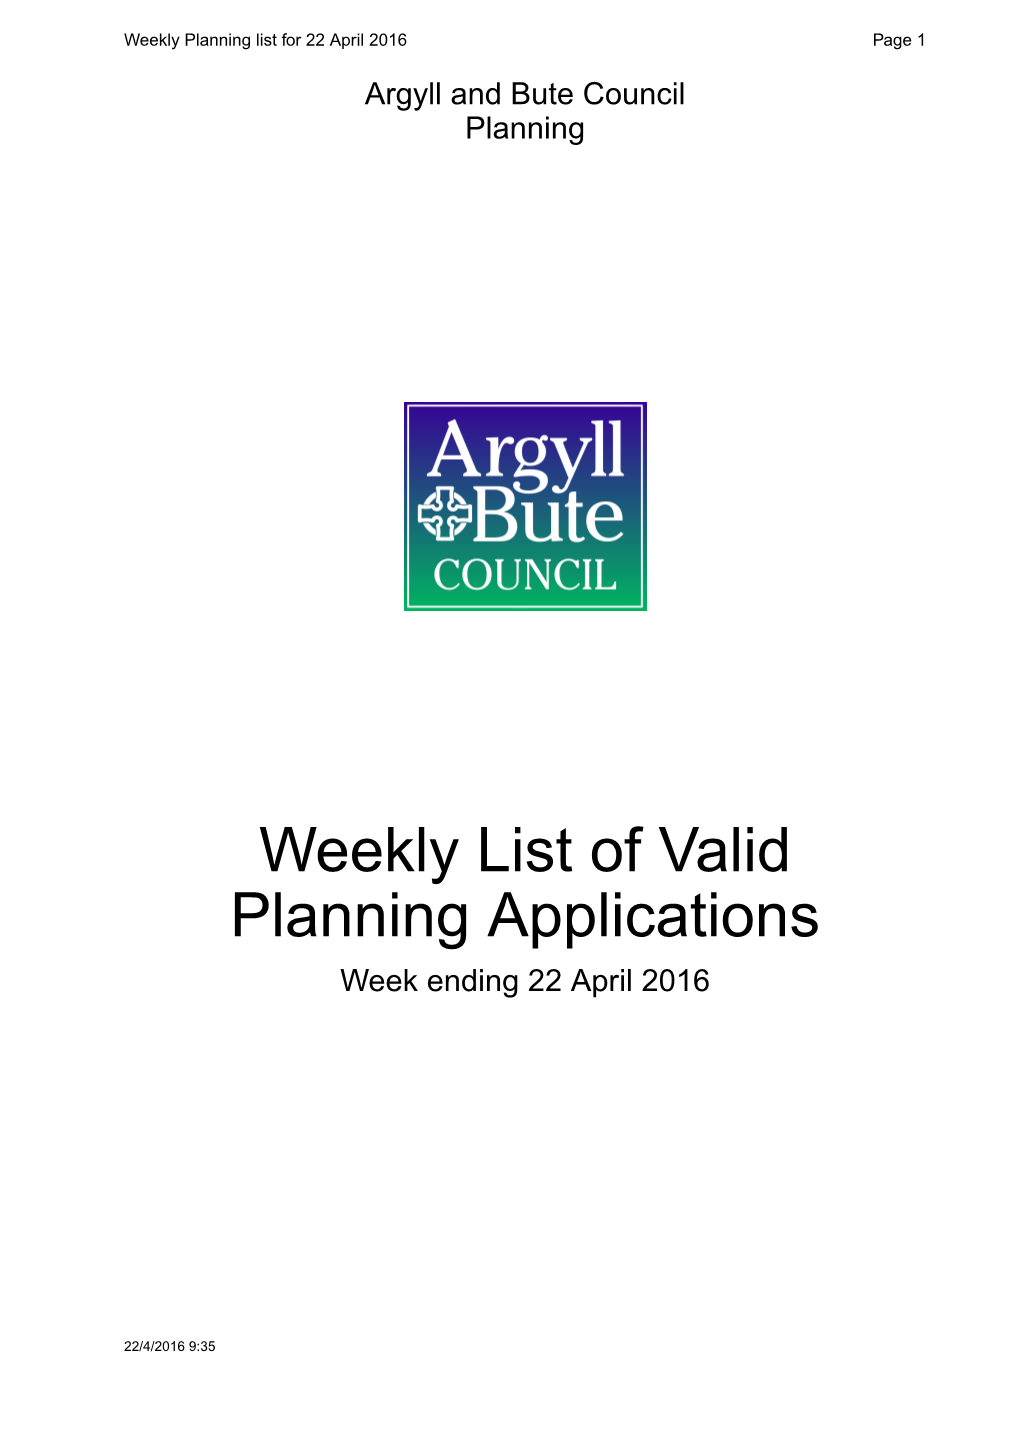 Weekly List of Valid Planning Applications 22Nd April 2016.Pdf